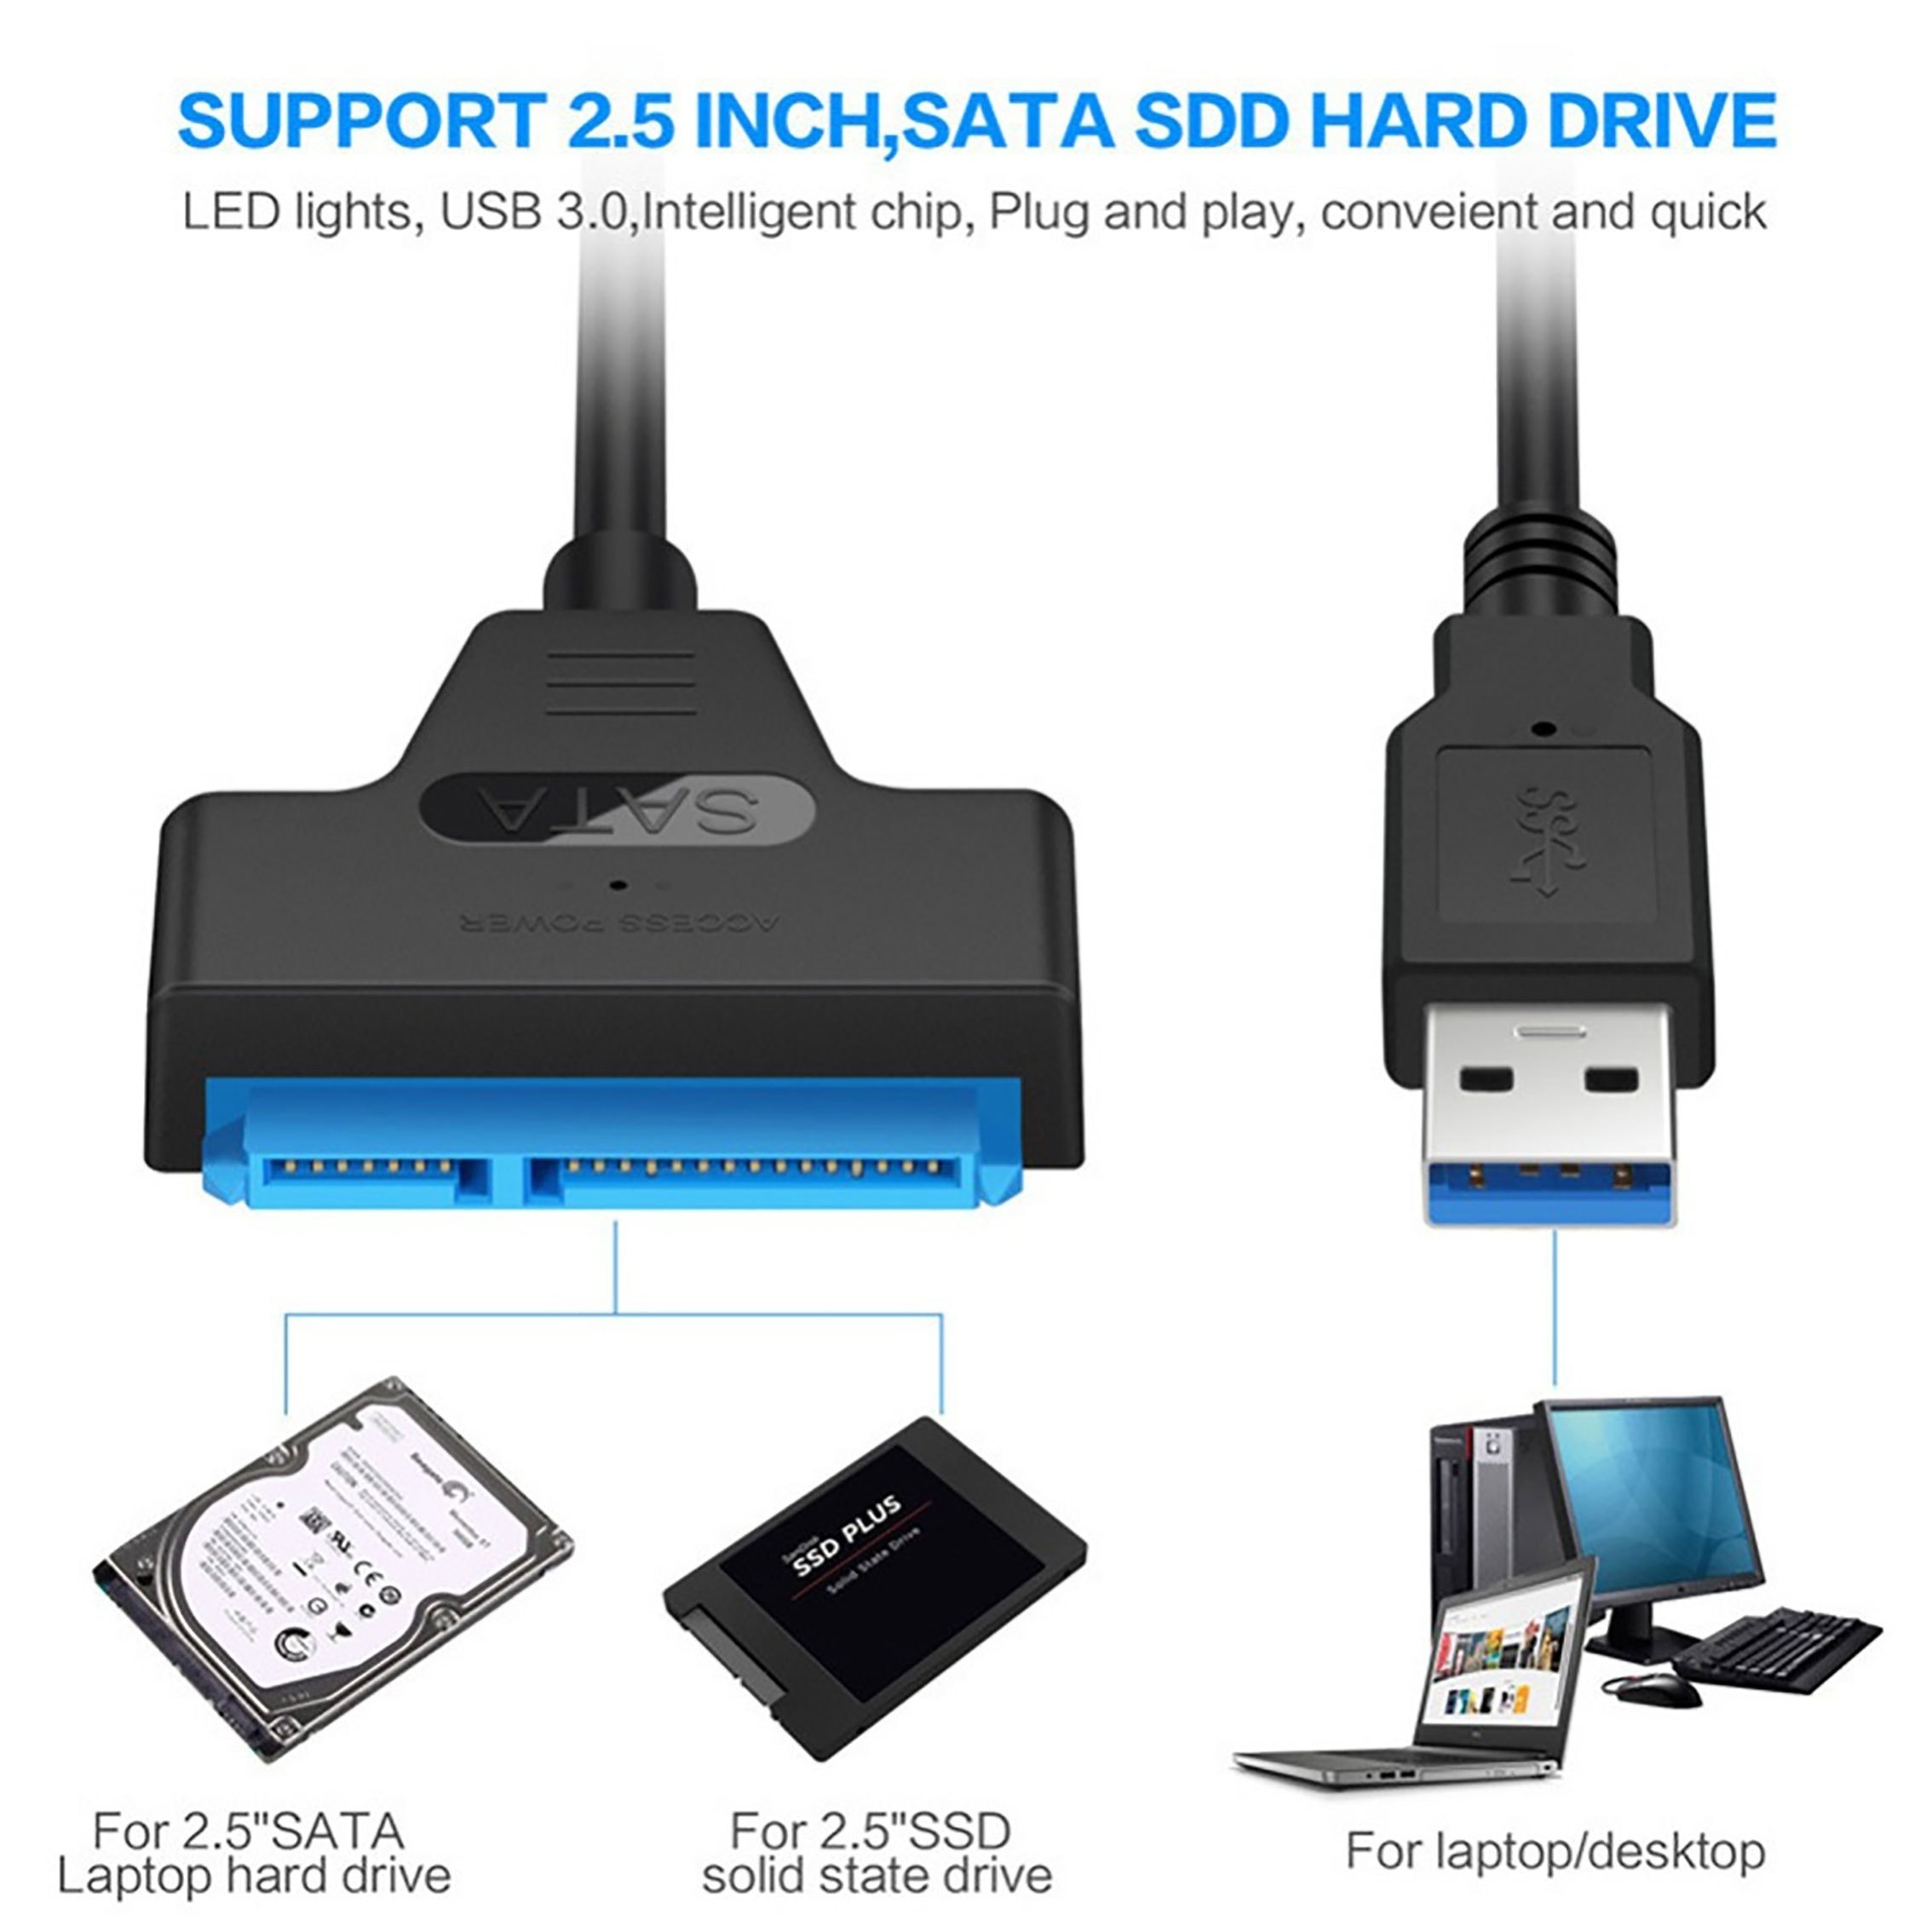 Maxmoral Super Speed USB 3.0 to SATA III 2.5 inch Hard Drive Adapter Converter Cable,Supports UASP SATA III II I to USB 3.0,External 2.5 HDD SSD